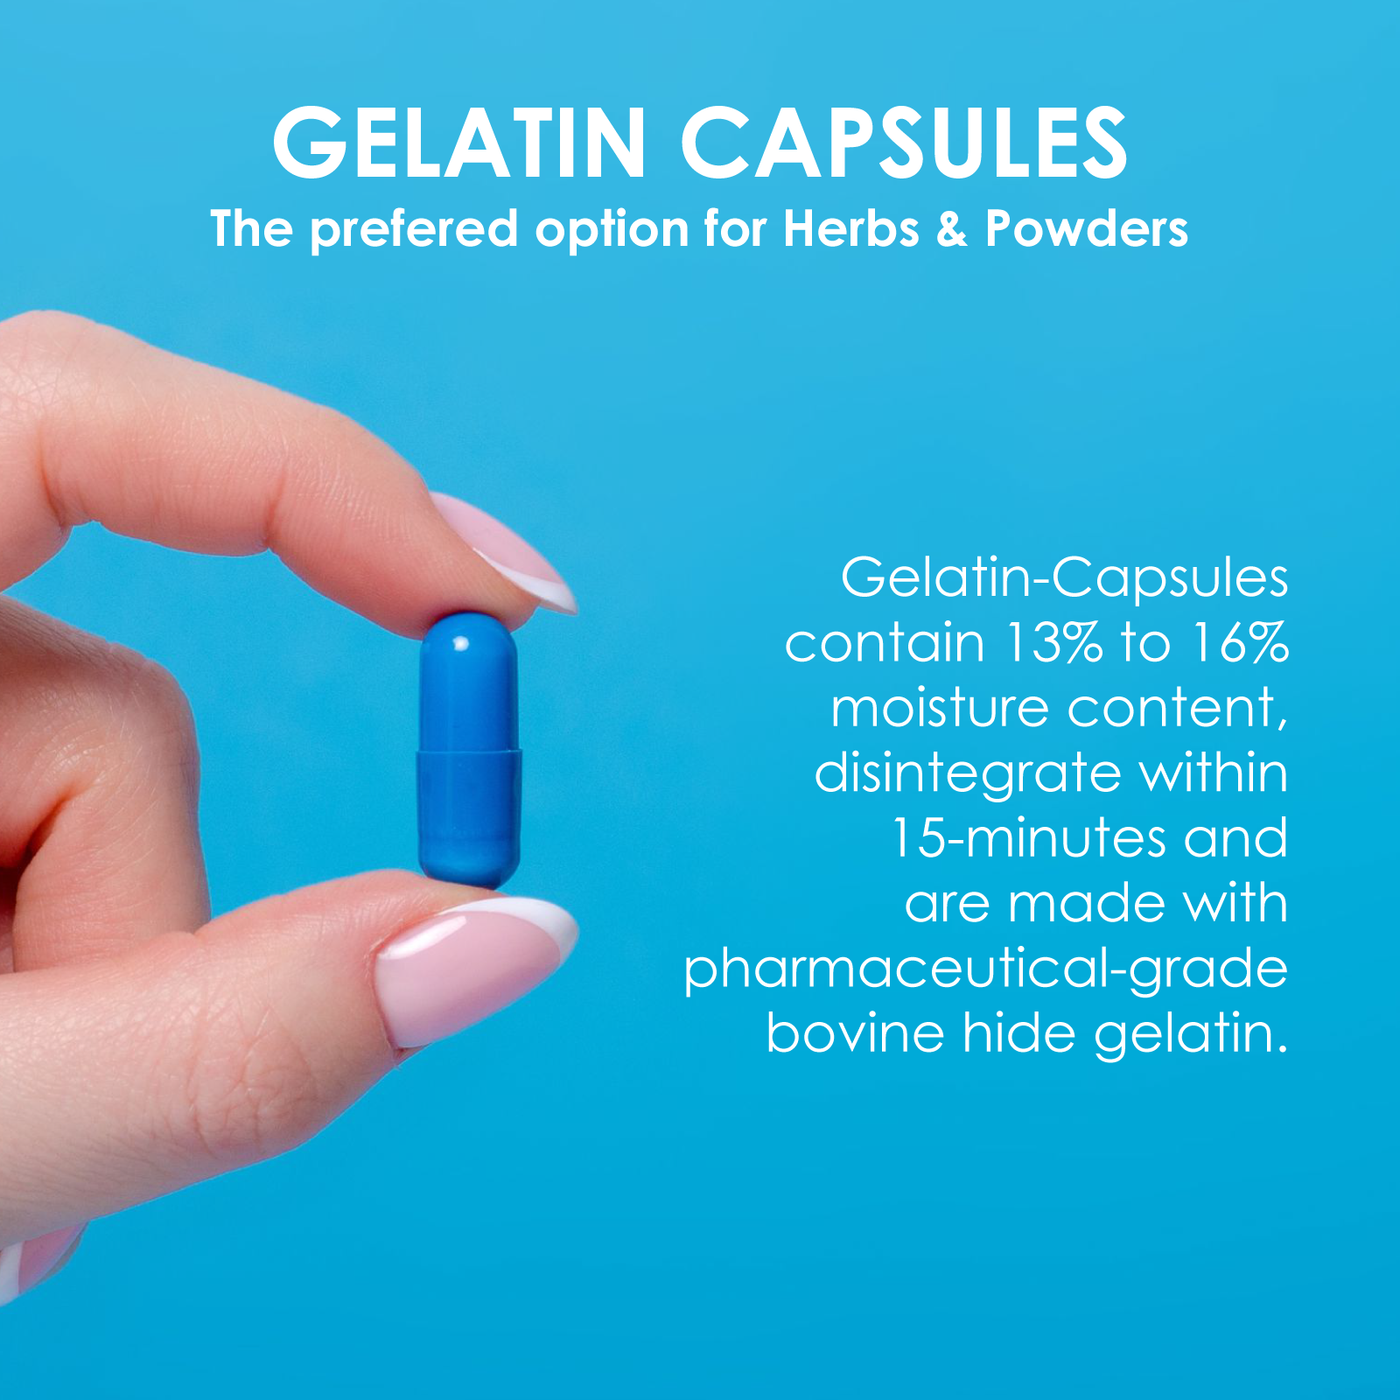 Colored Size 0 Empty Gelatin Capsules by Capsuline - Blue/White 1000 Count - 1000